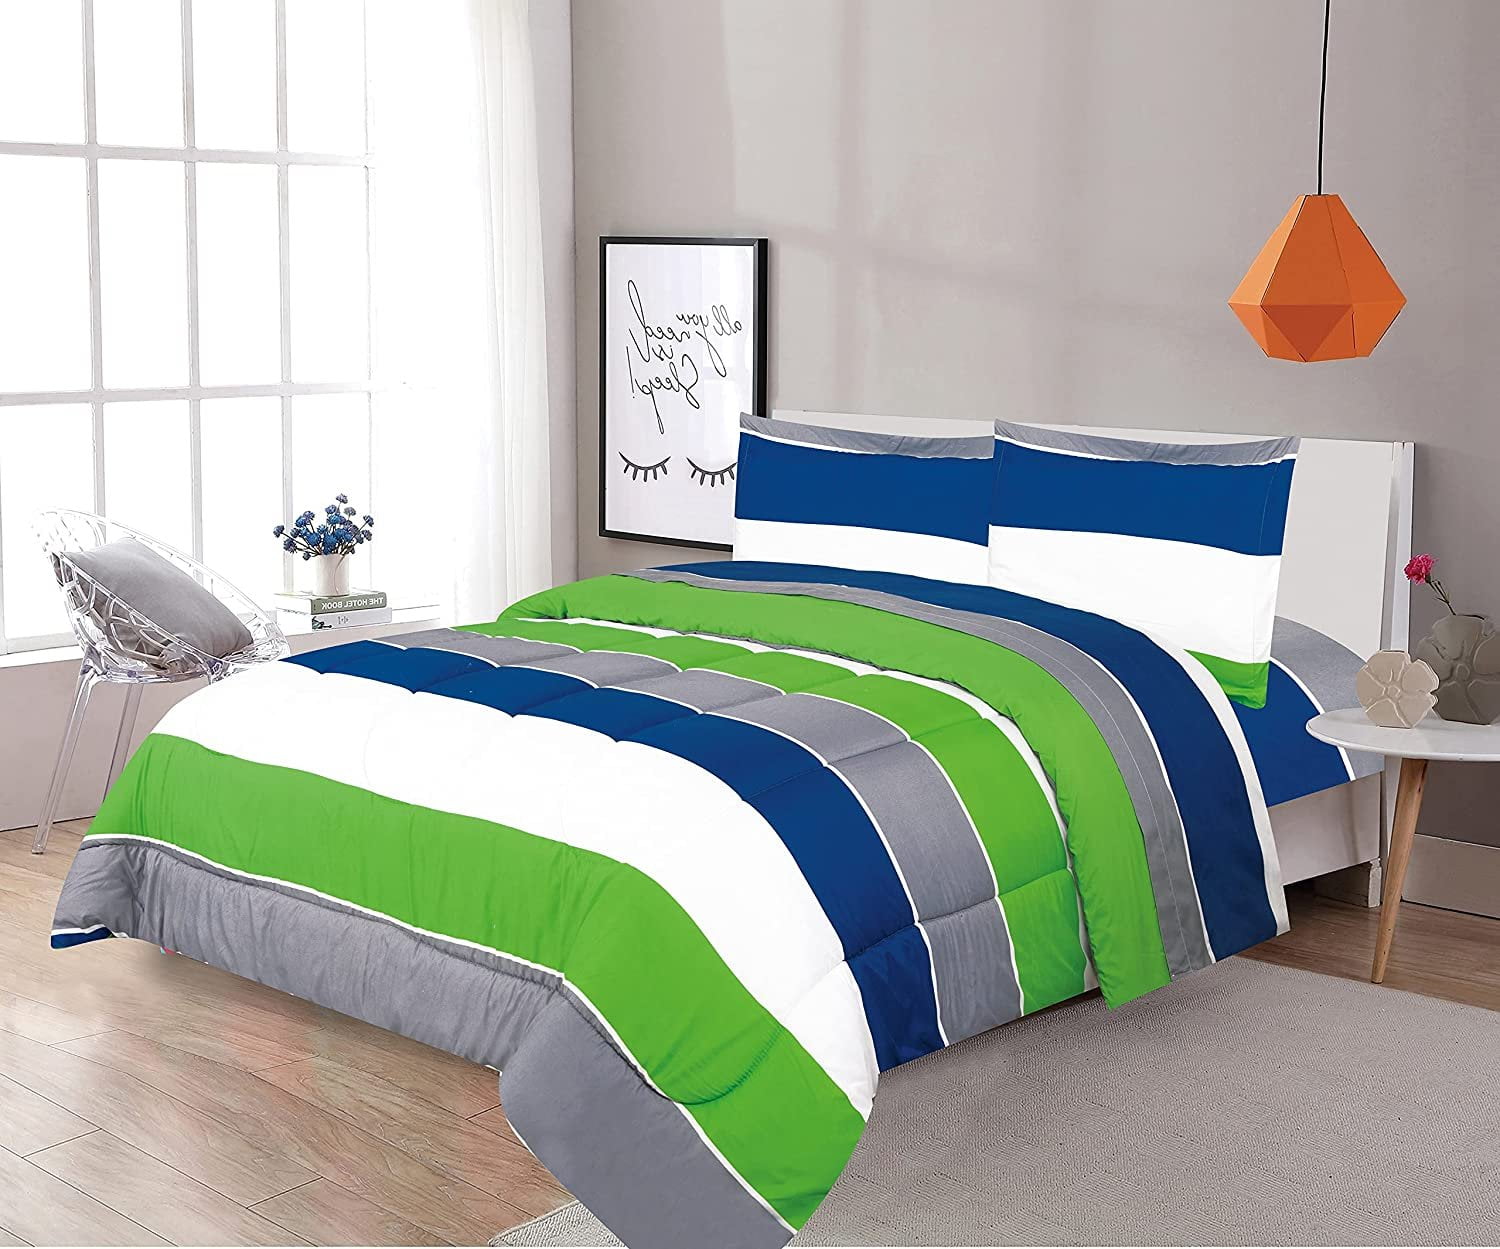 Kids Zone Home Linen 2Pc Twin Bedspread Coverlet Quilt Set For Boys Construction 